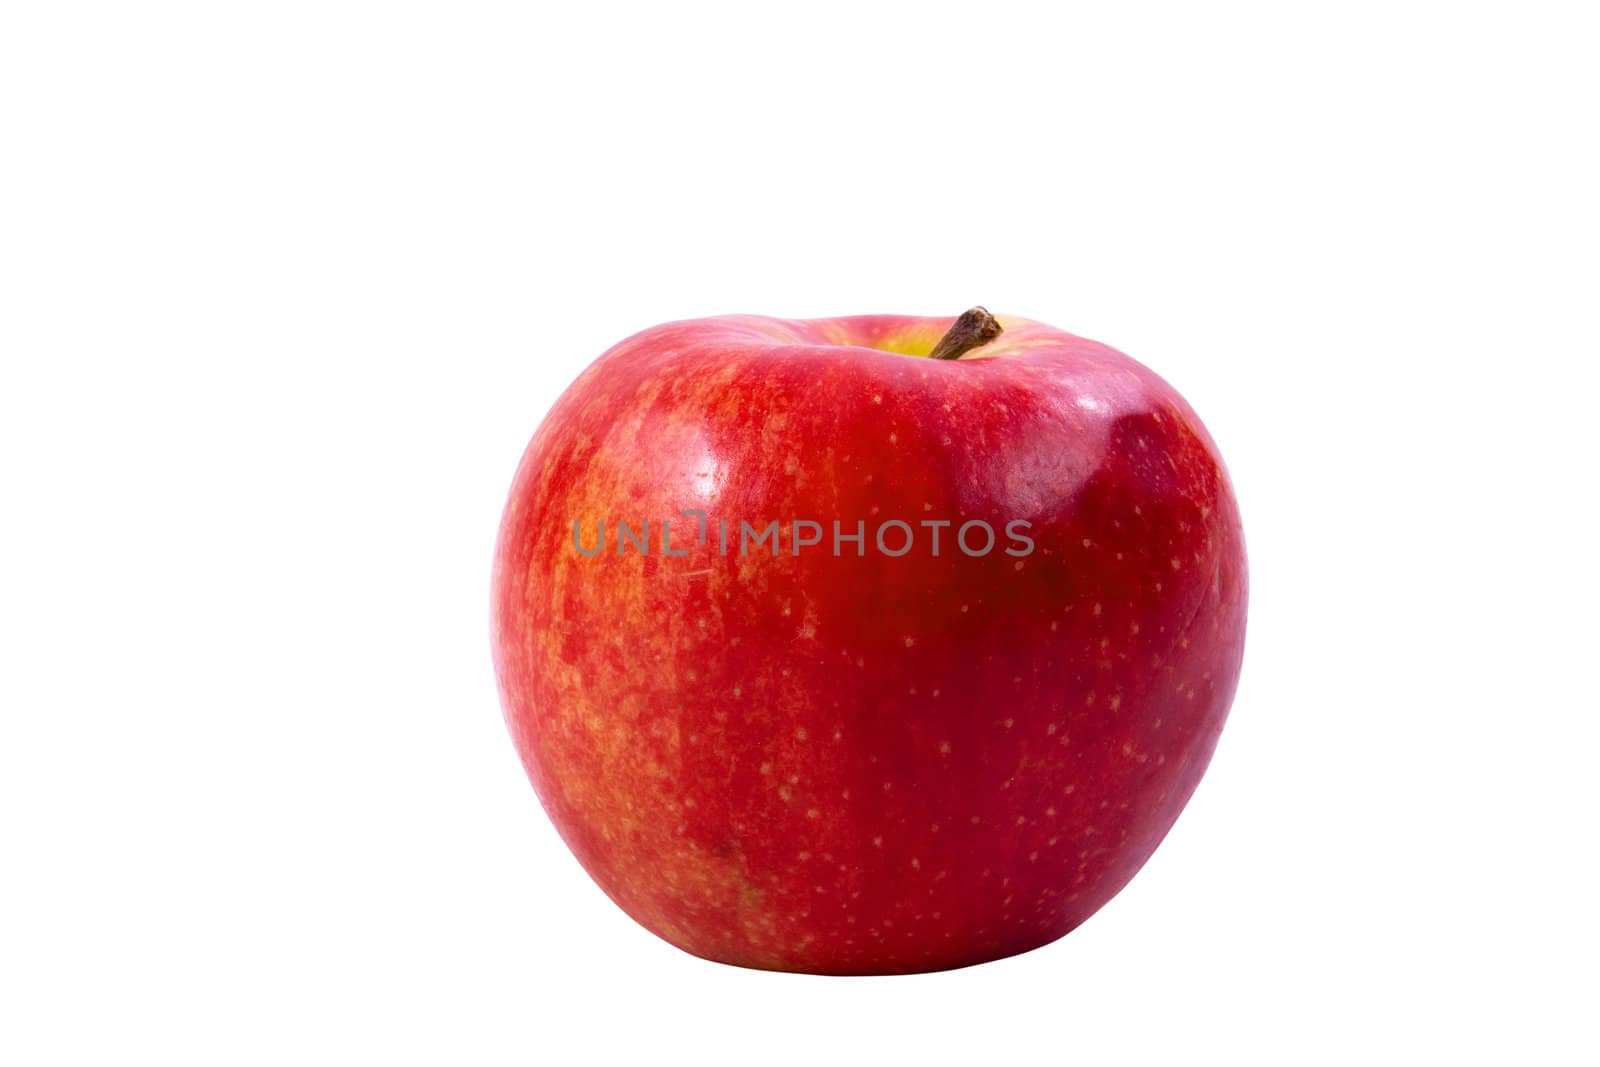 Red apple(clipping path included) by uriy2007